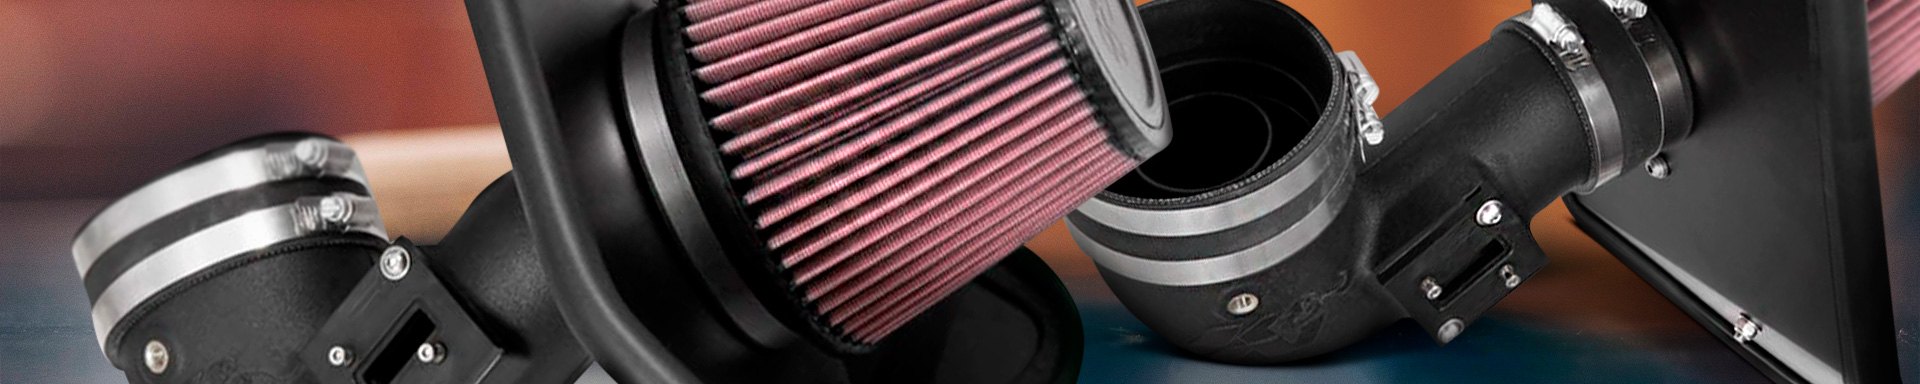 57-Series Air Intakes Are Now Available For 2016-2017 Camaro 2.0L Models